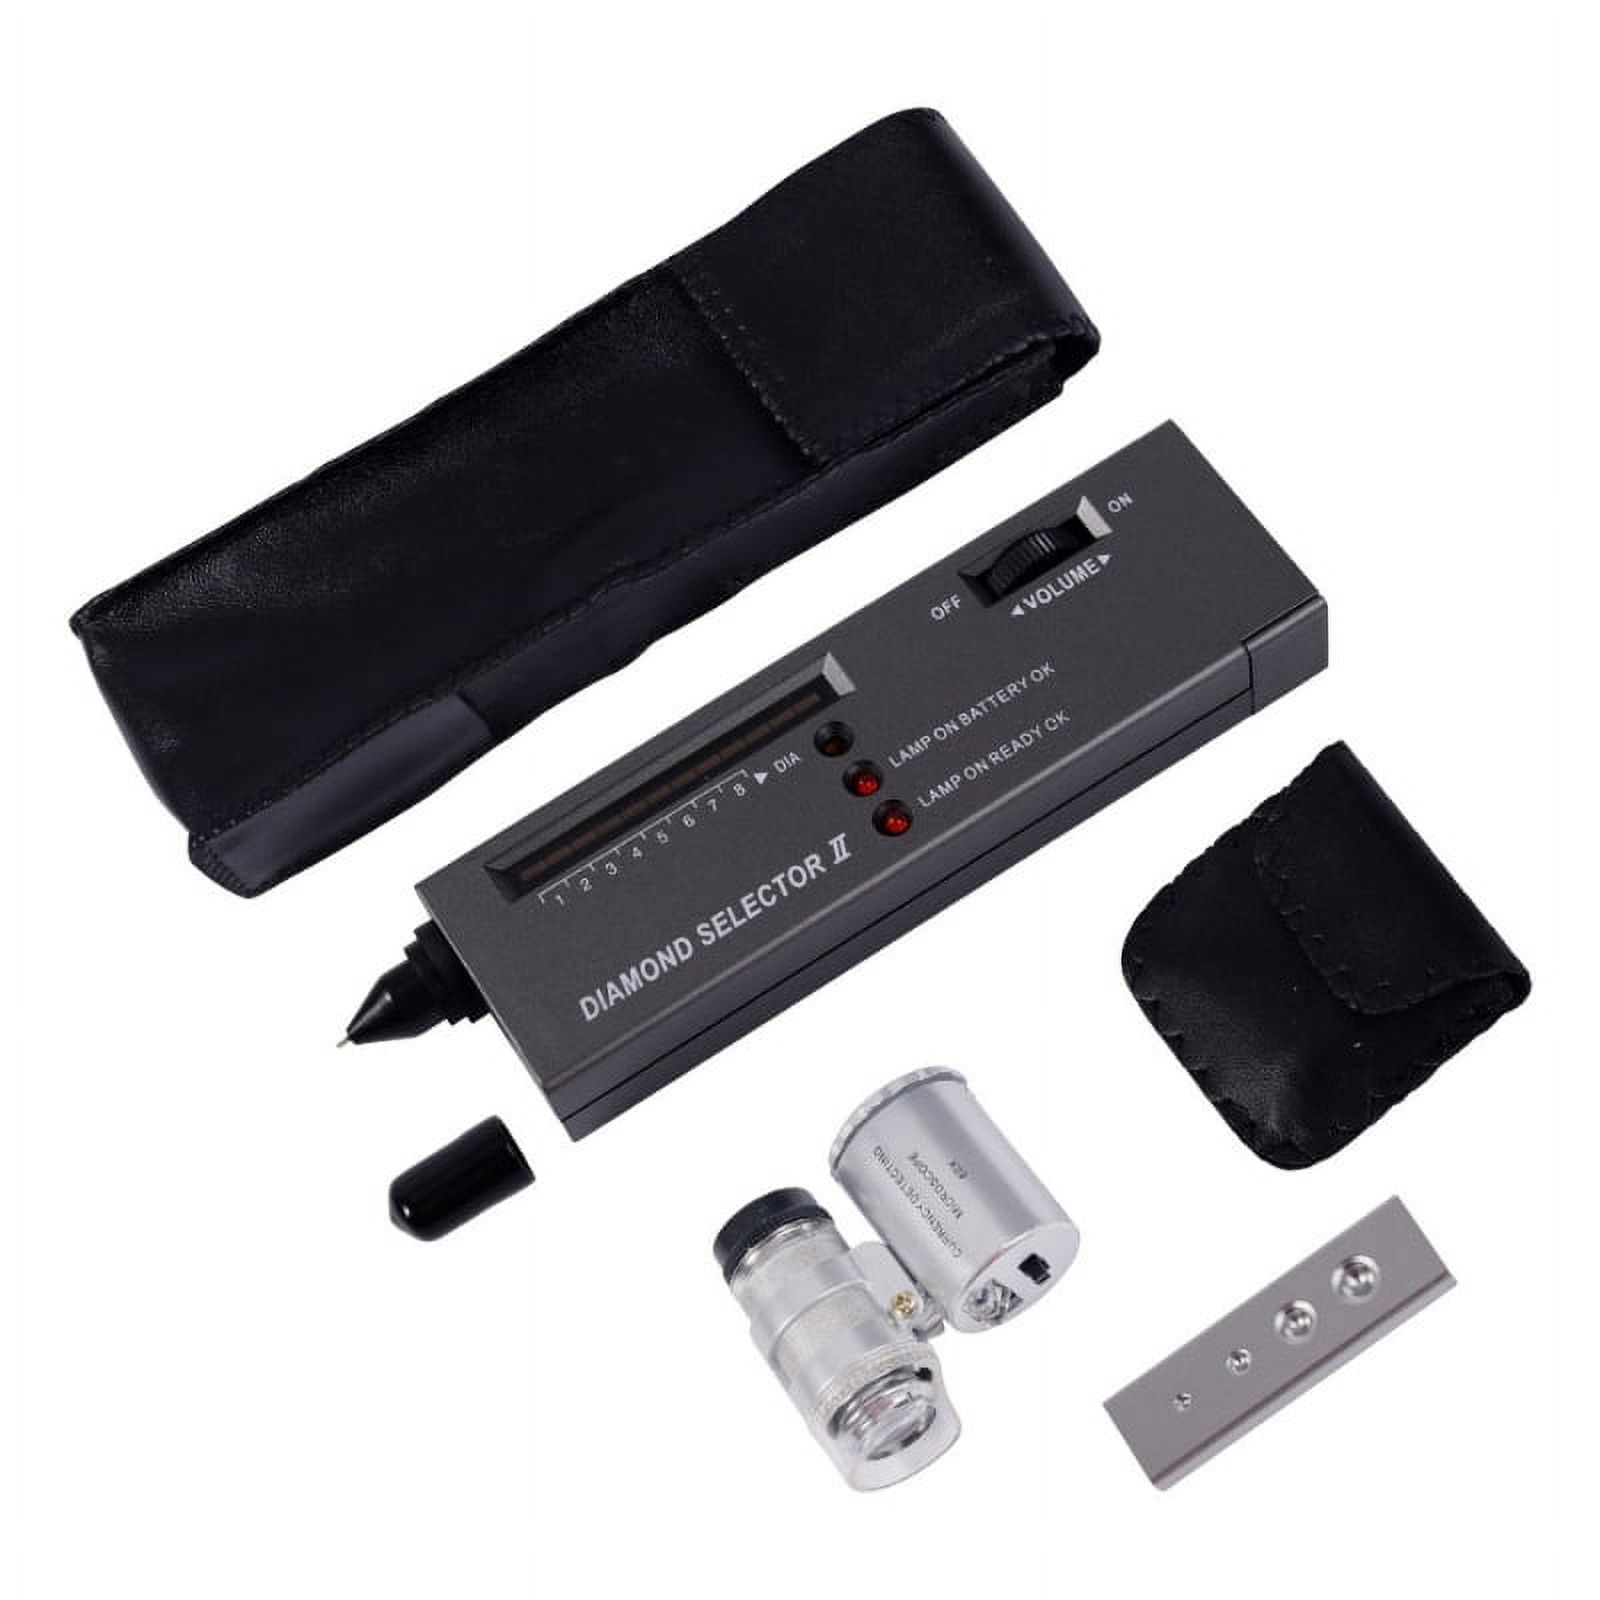 Portable Diamond Tester Pen with 60X LED Lighted Loupe Magnifying Glasses Combo - image 1 of 11